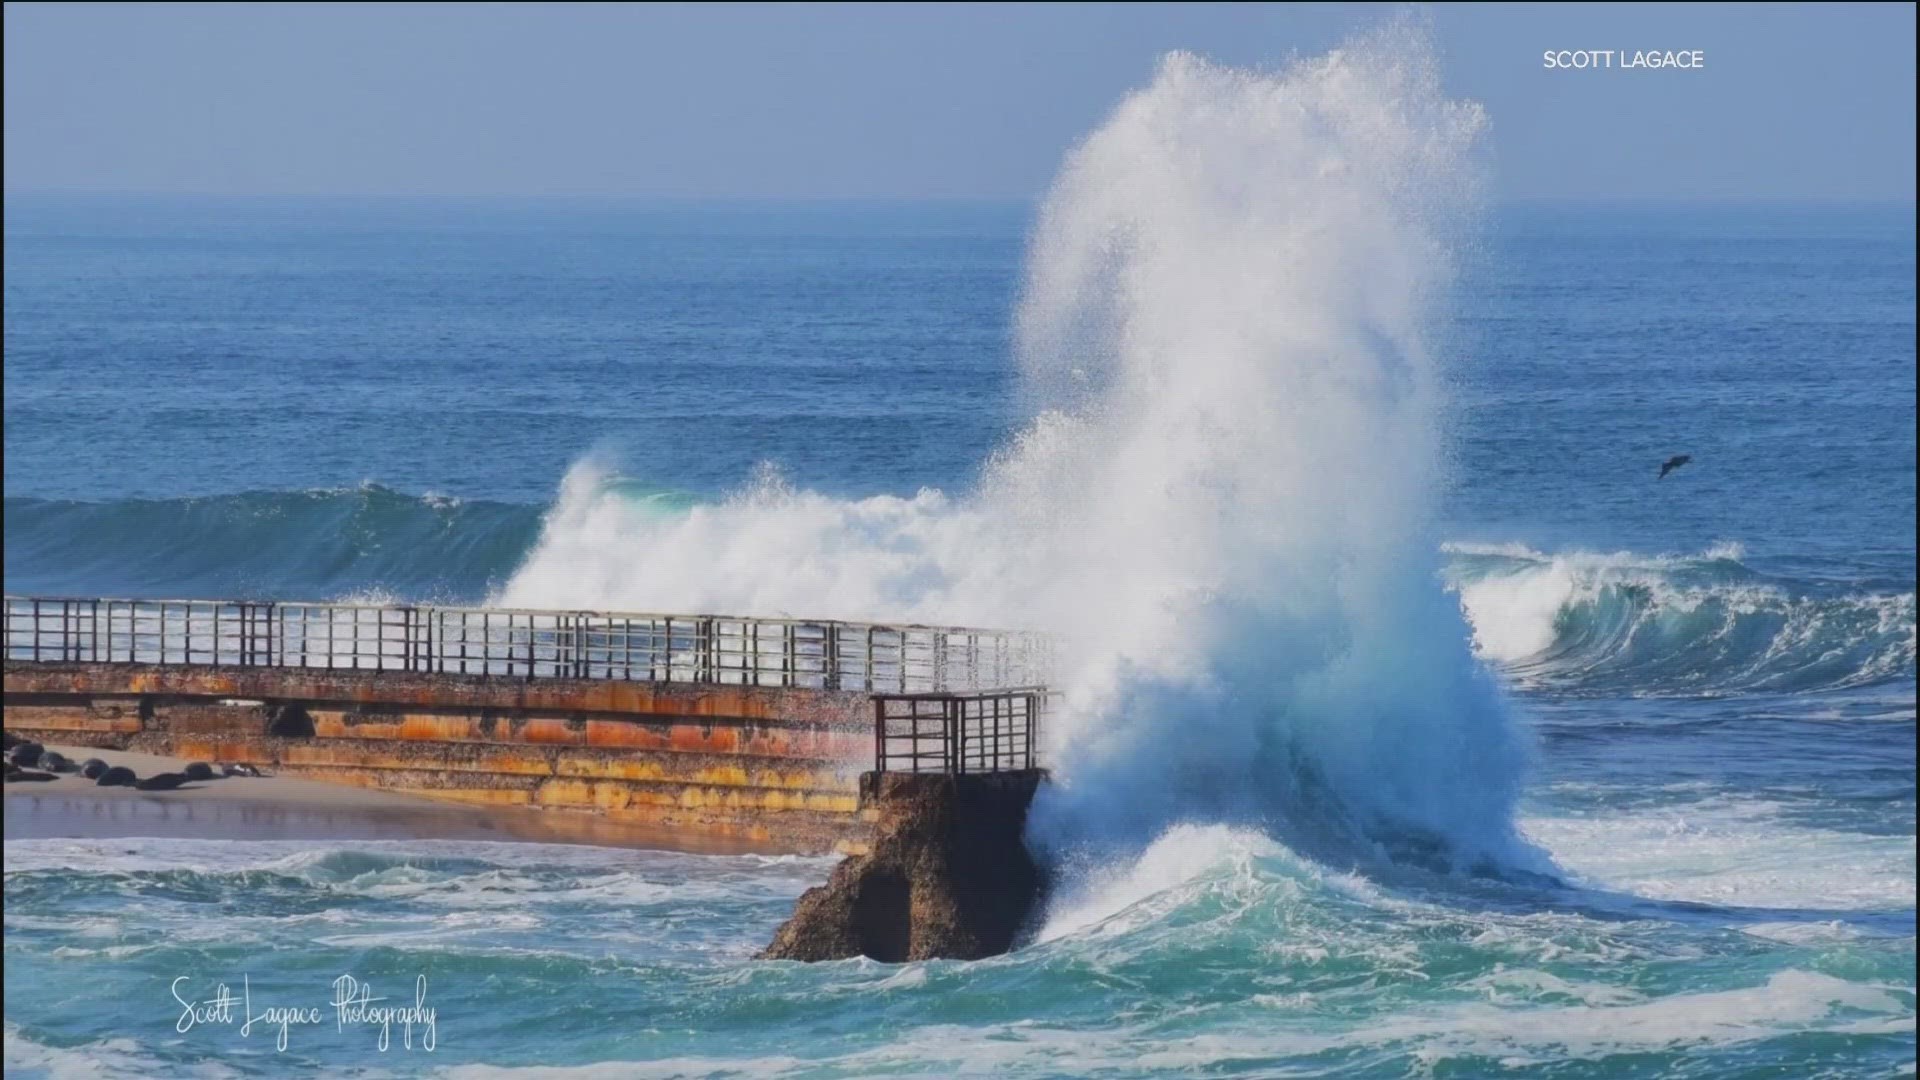 City crews were seen inspecting the damage and missing protective railing on the Children's Pool sea wall in La Jolla.